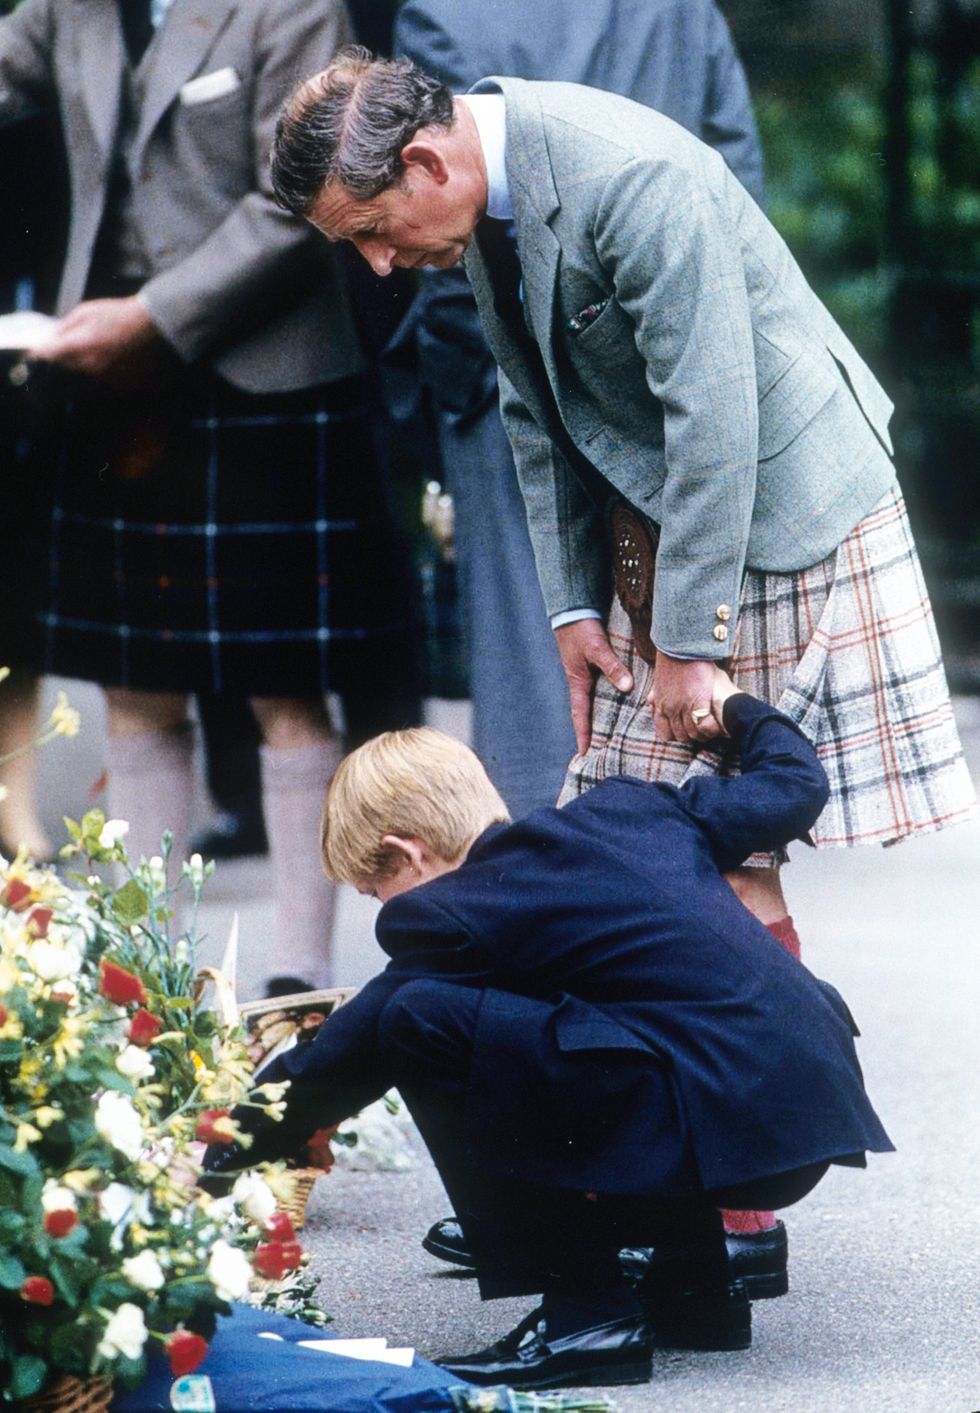 in memory of diana, princess of wales, who was killed in an automobile accident in paris, france on august 31, 1997